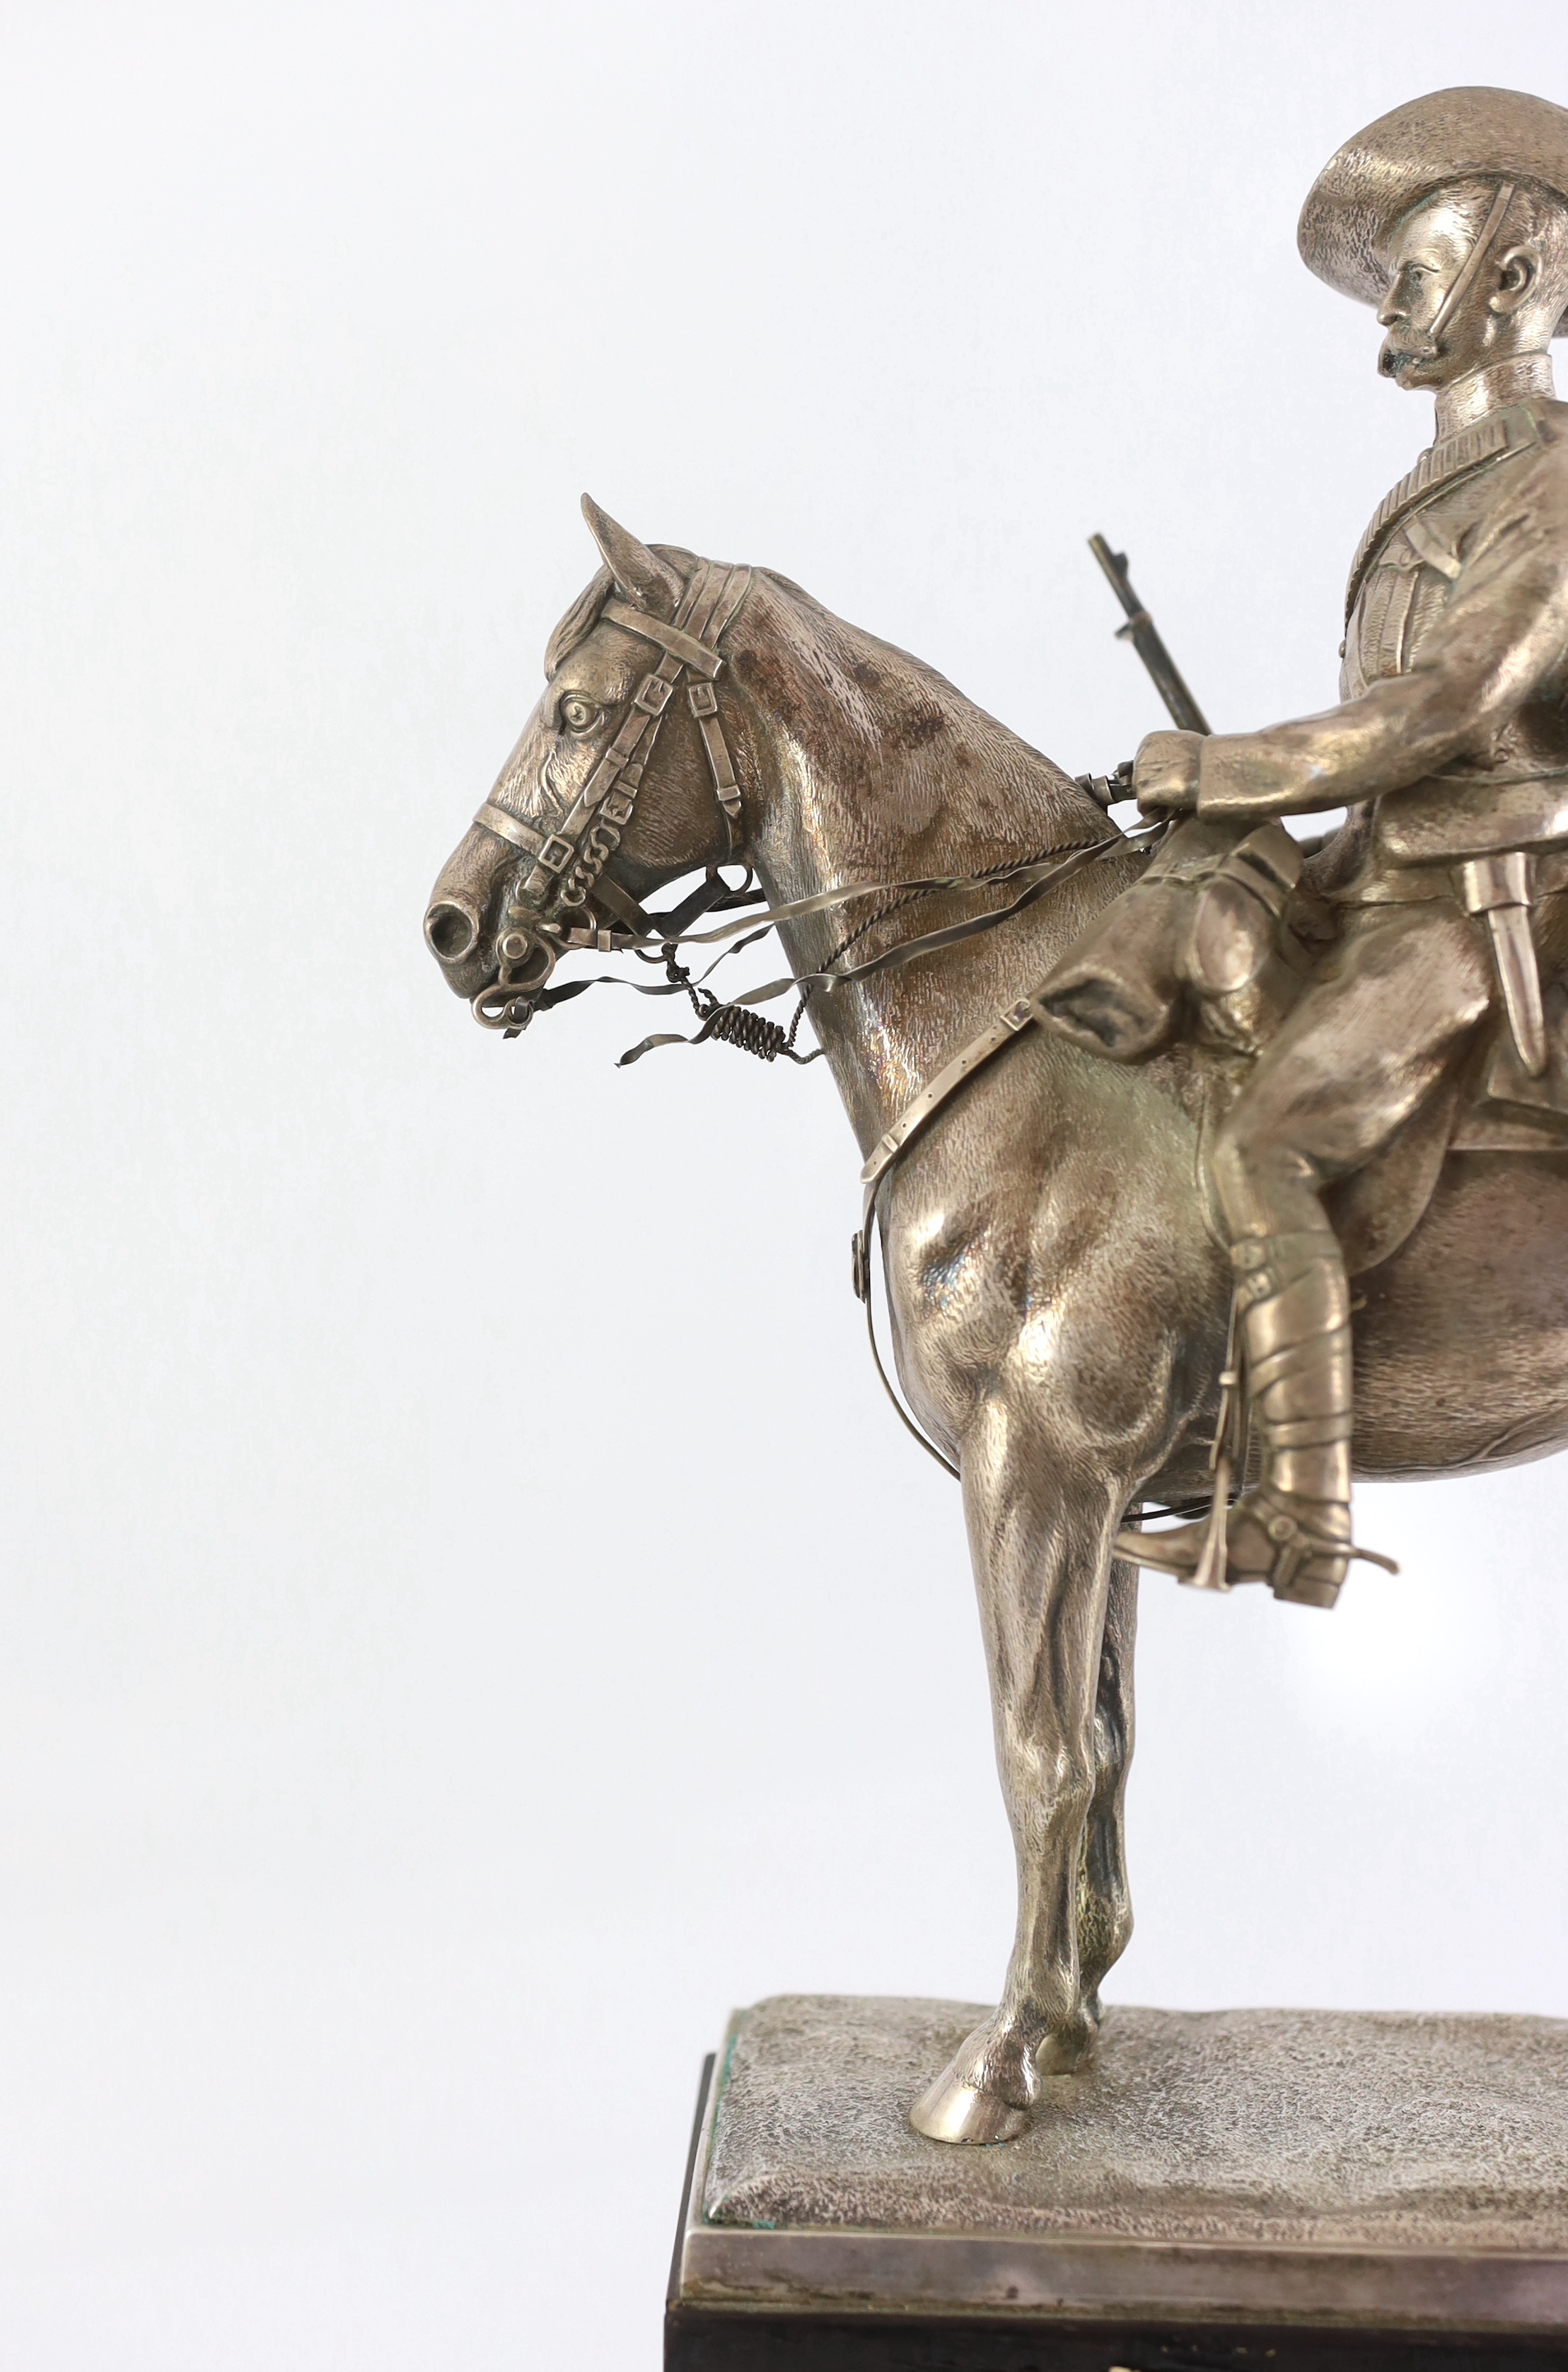 An early 20th century silver model of a City Imperial Volunteer, holding a rifle, on horseback, early 20th century